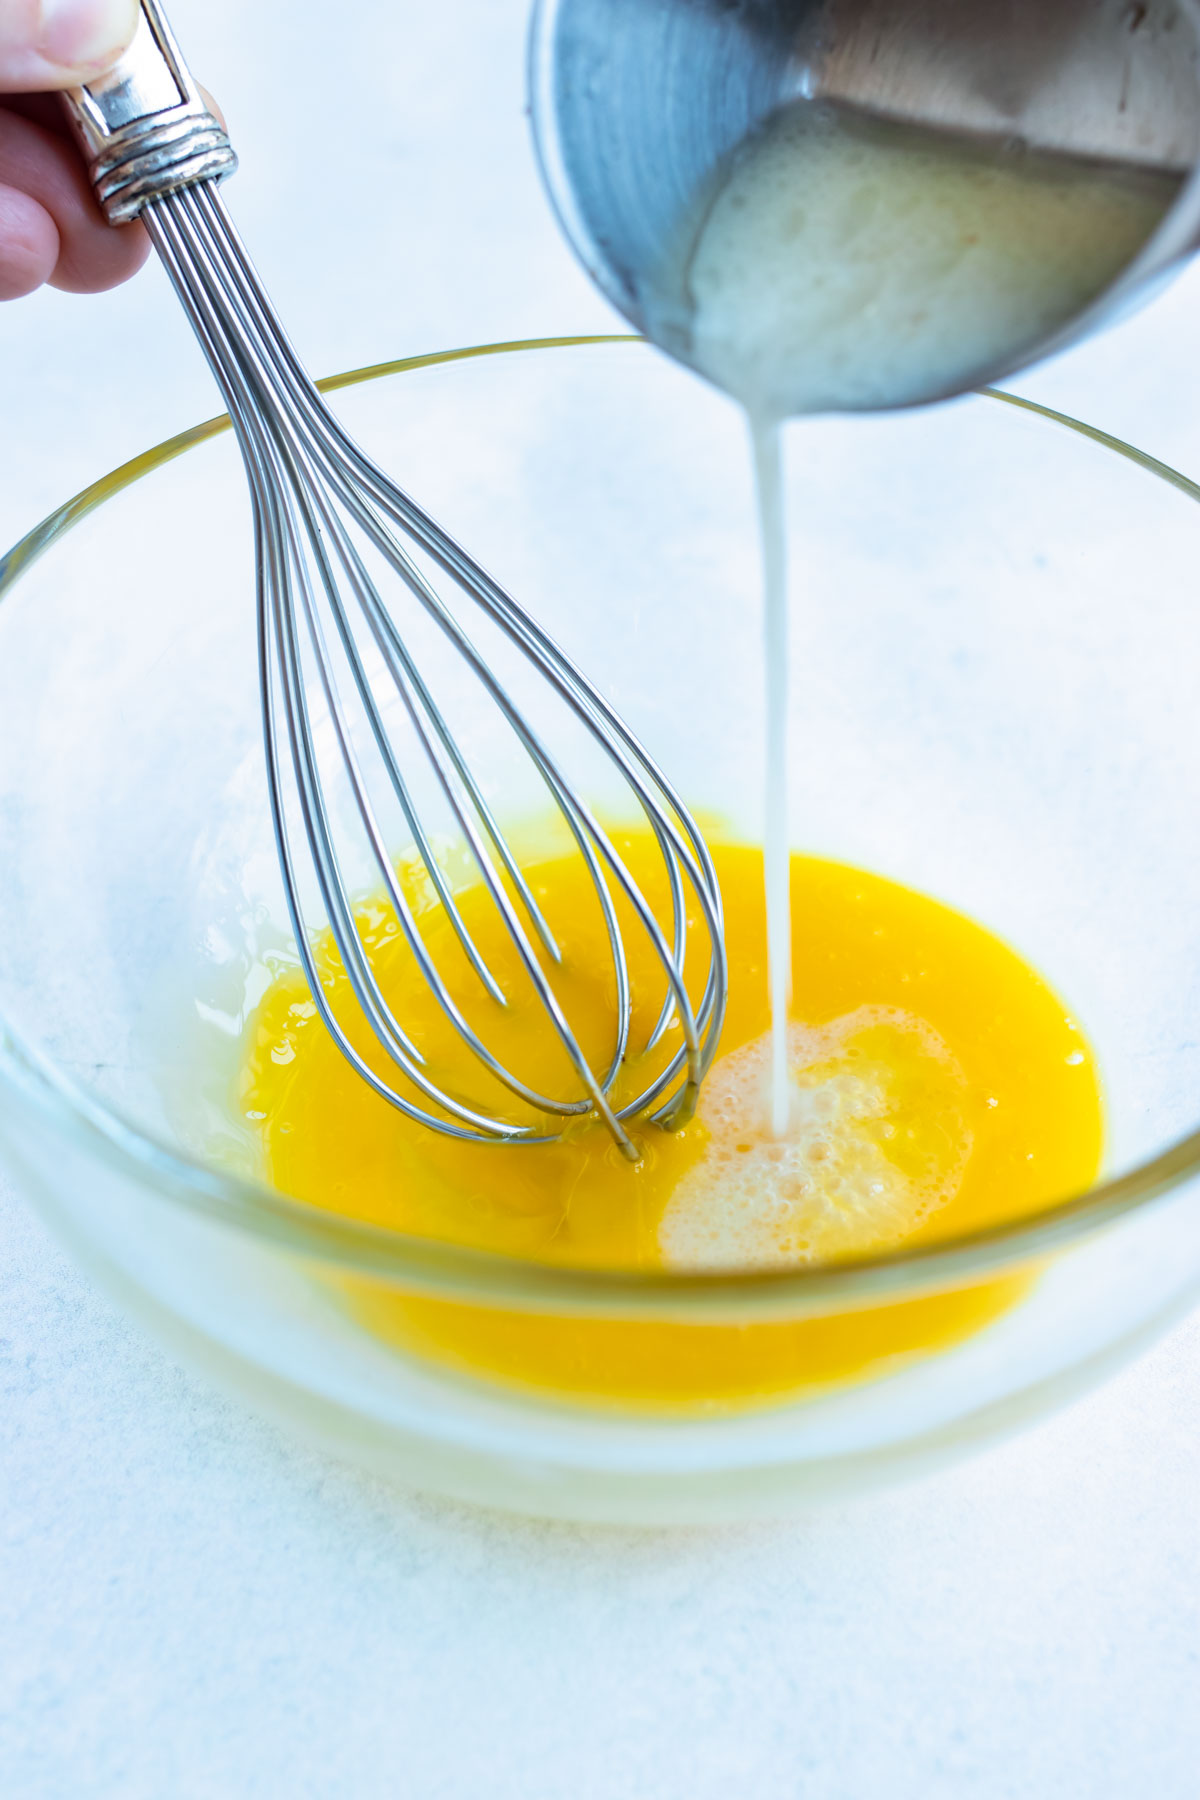 Whisk egg yokes with a few tablespoons of warm milk to temper them.